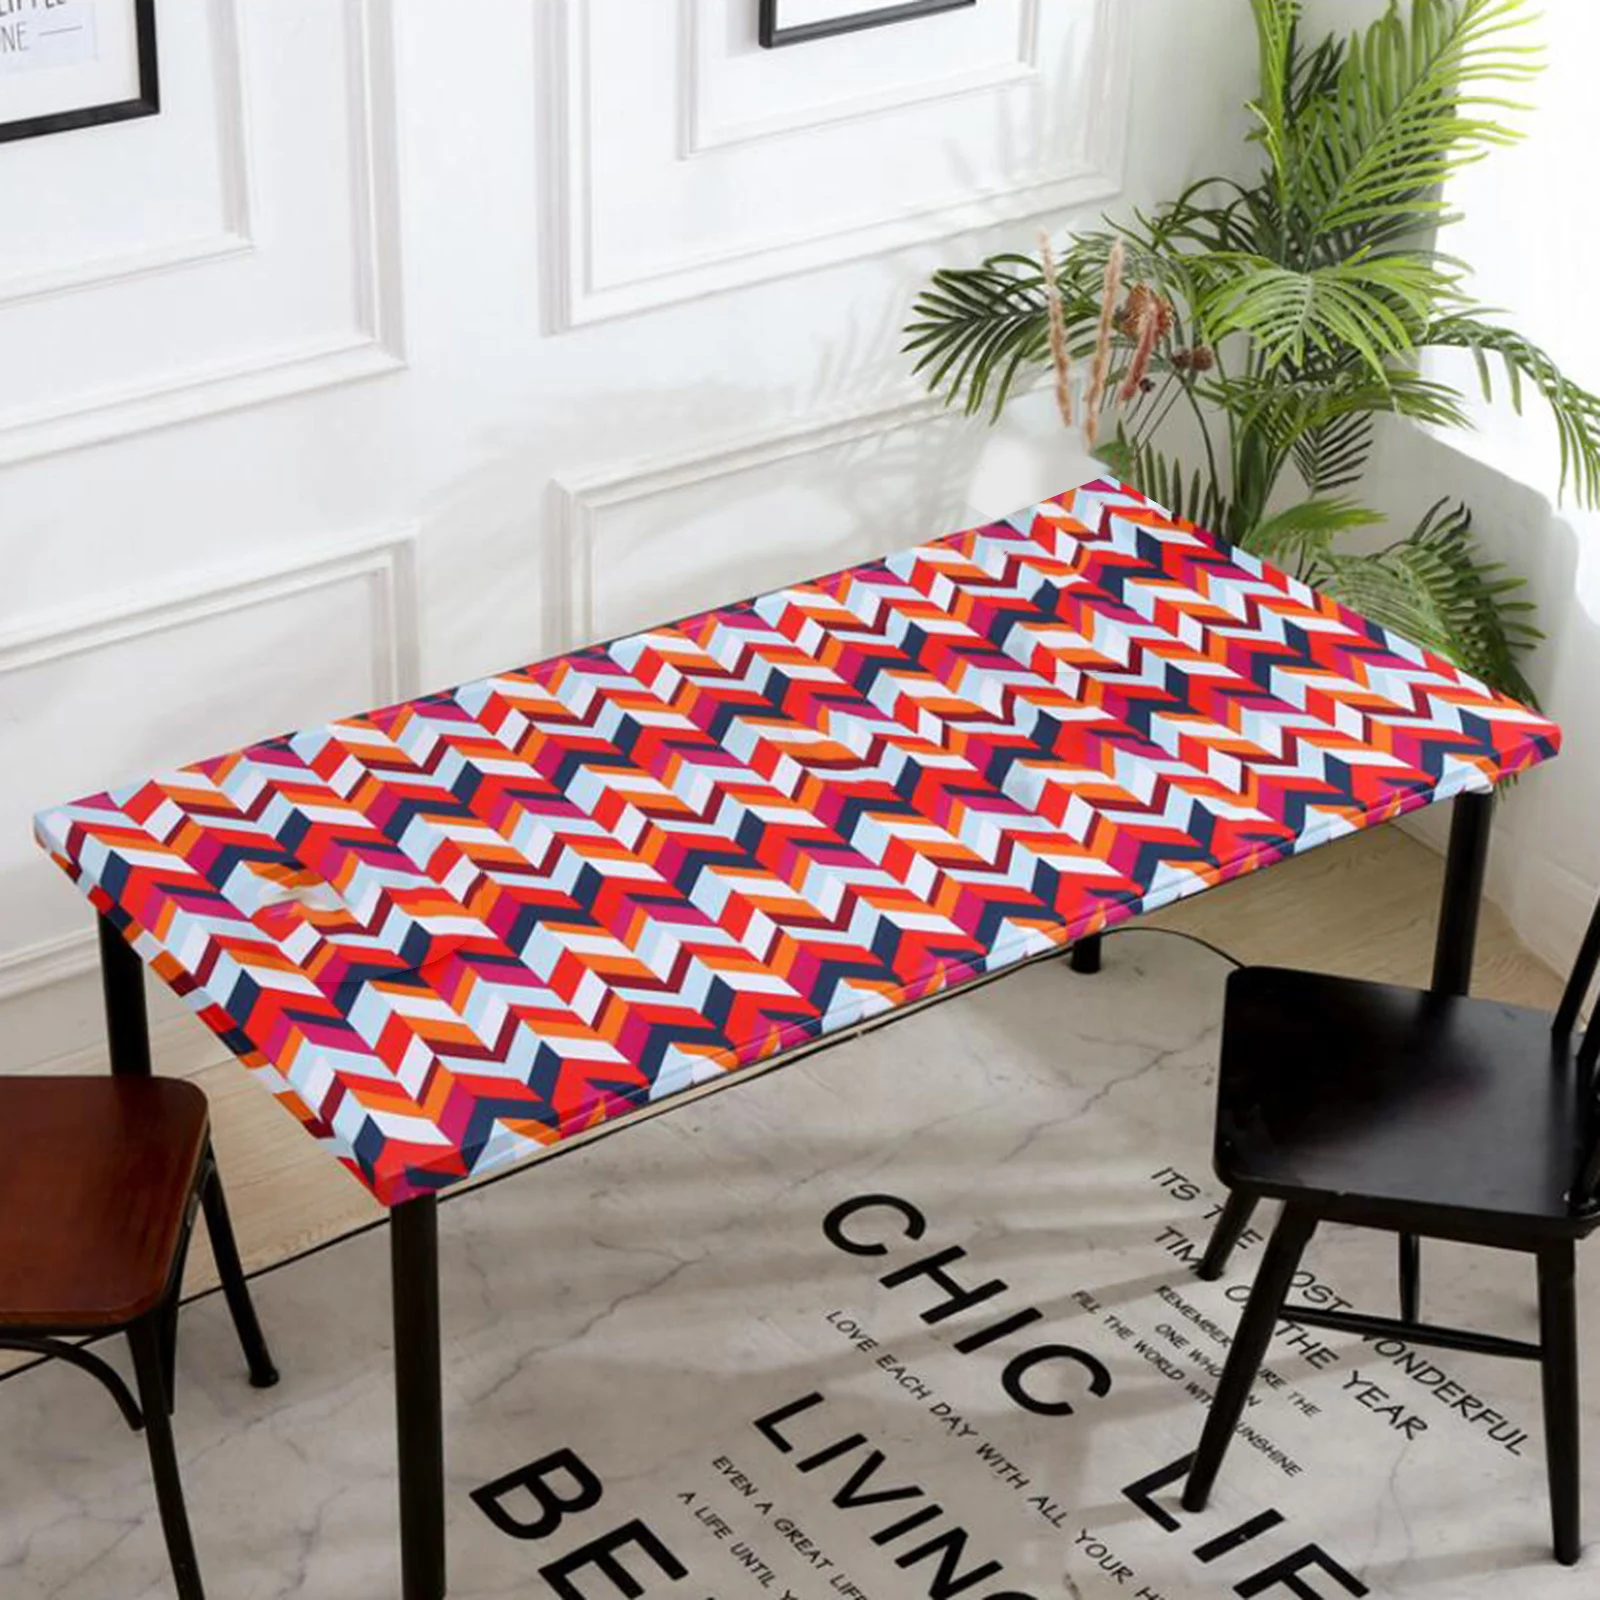 Rectangular Elastic Edged Polyester Table Cloth Wedding Cafe Parties Dinner Tablecloth Table Cover Dustproof 183x76cm